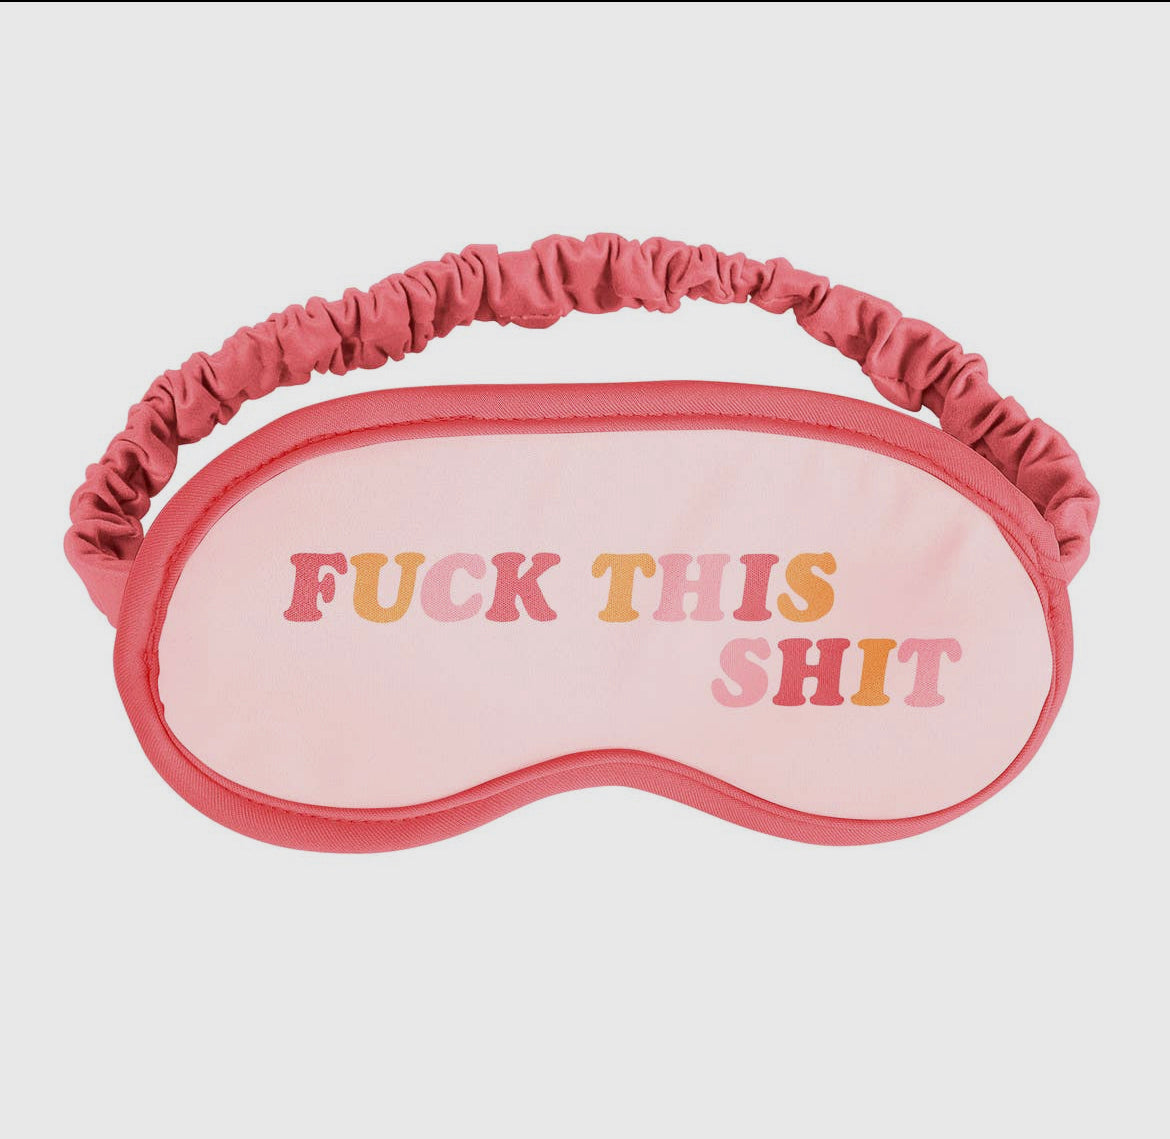 Fuck this shit sleep mask gift for her